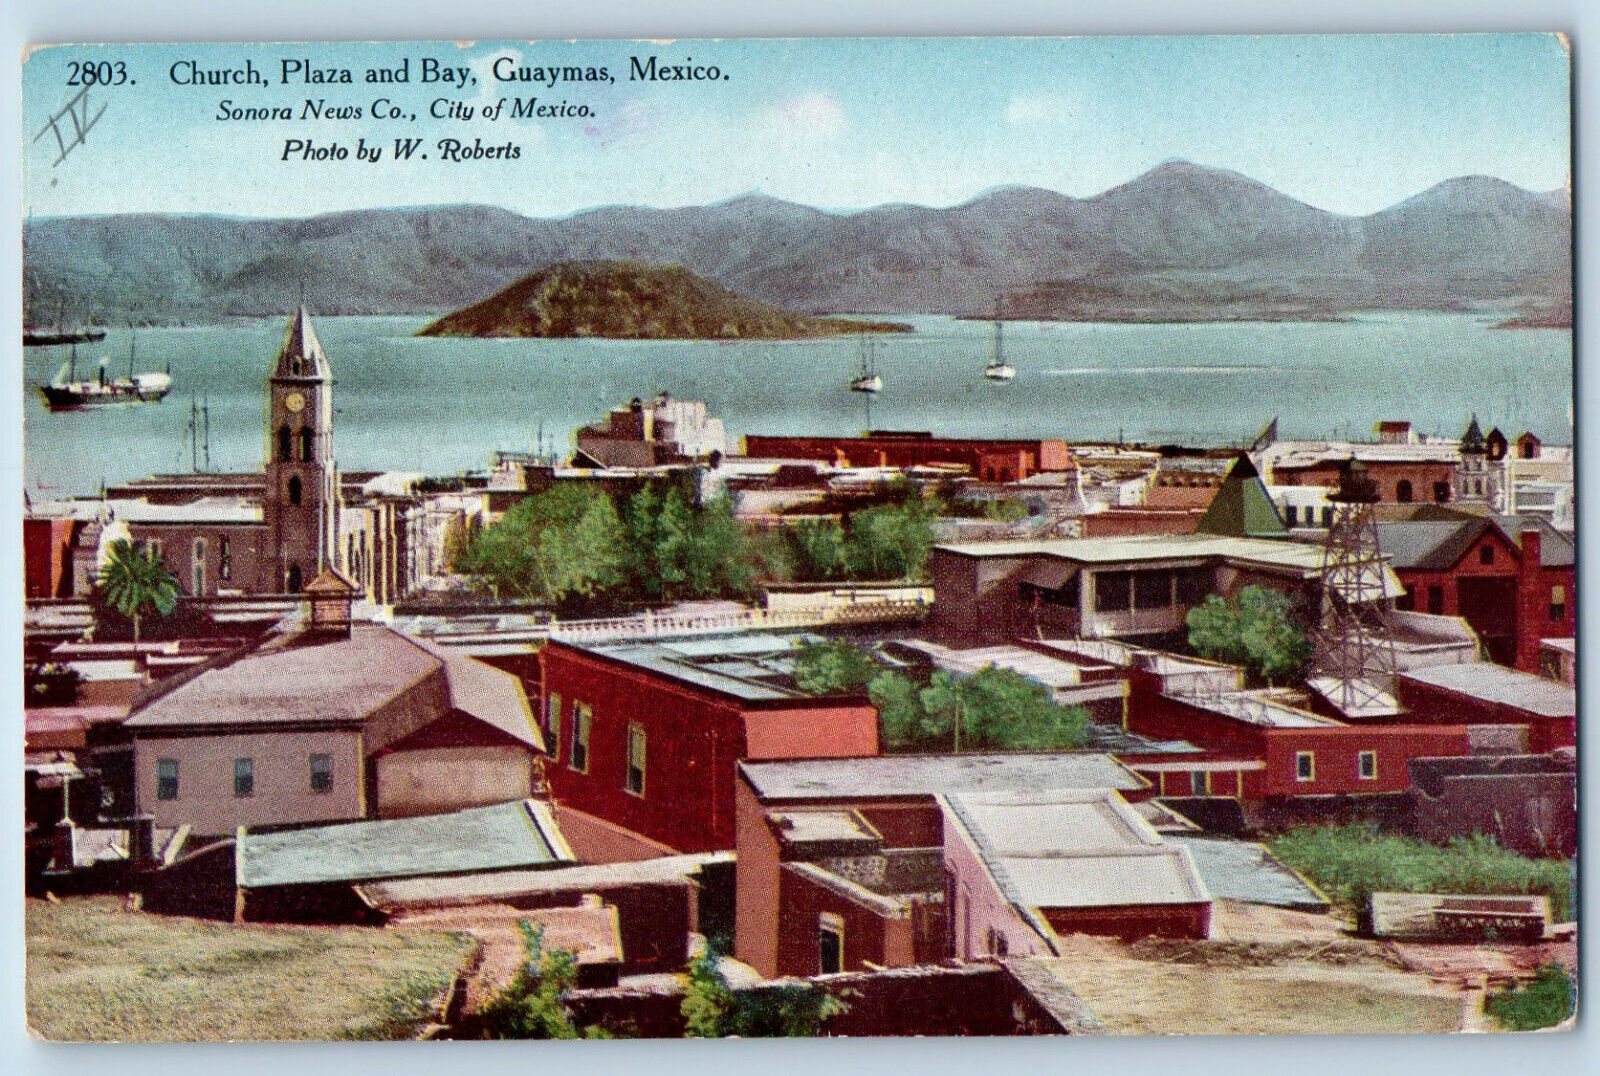 Guaymas Sonora Mexico Postcard Church Plaza and Bay c1910 Unposted Antique